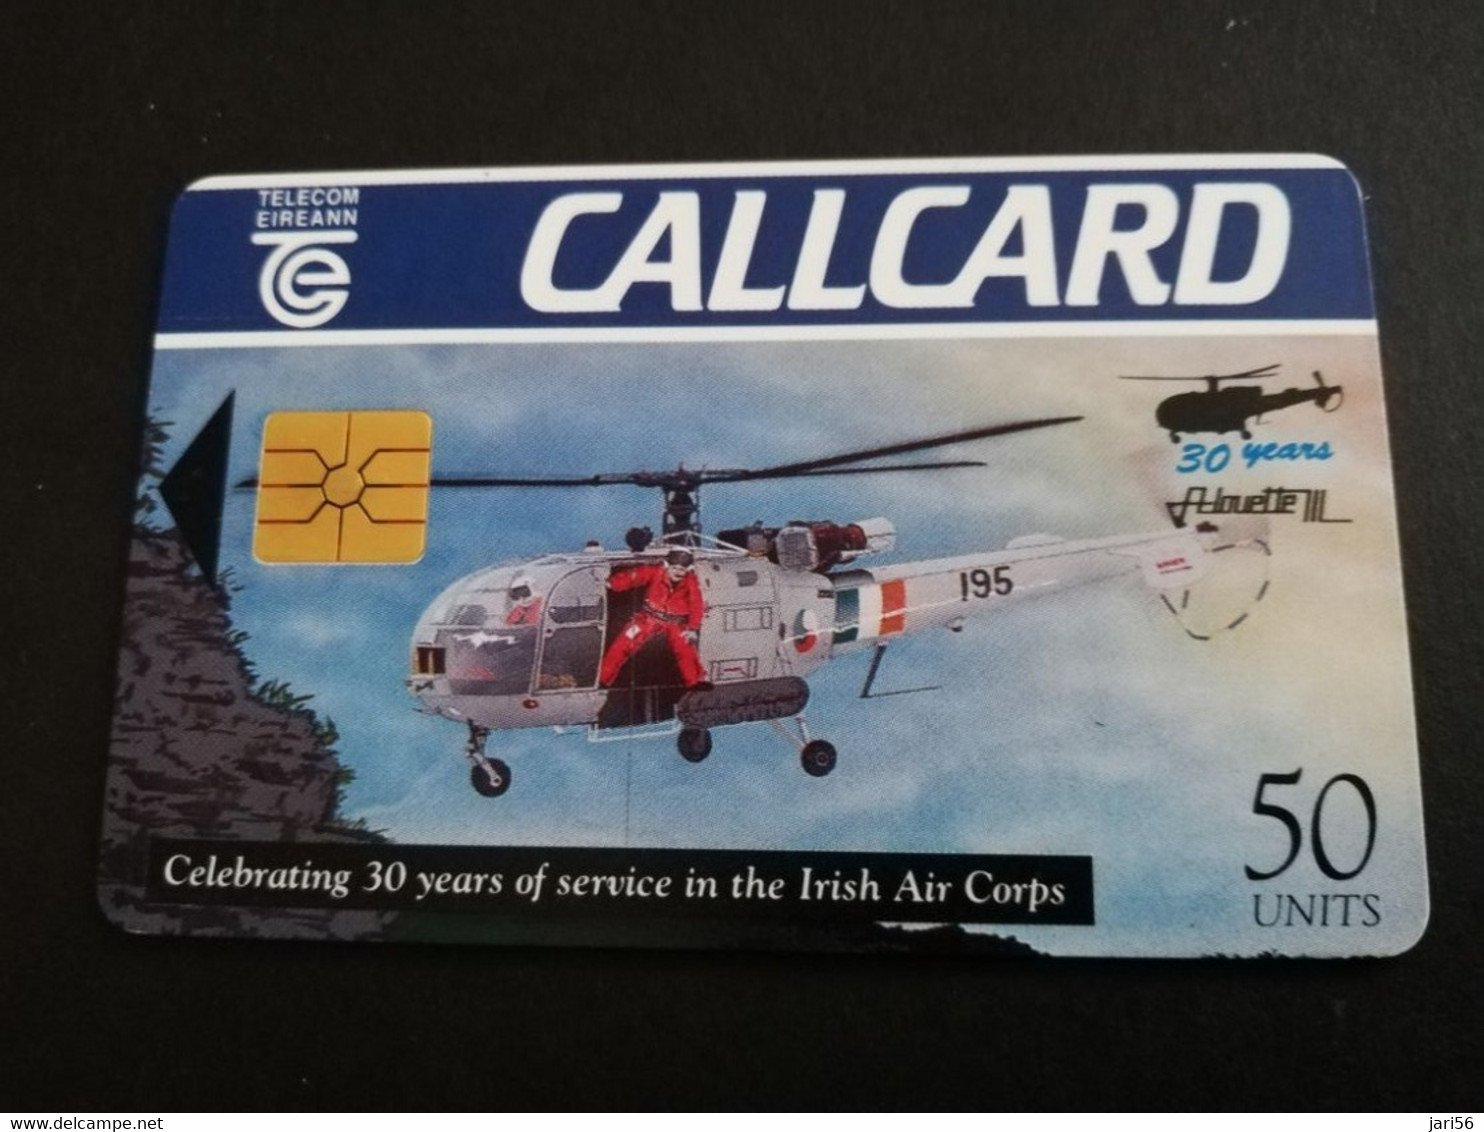 IRELAND /IERLANDE   CHIPCARD  50  UNITS  CELEBRATING IRISH AIR CORPS  HELICOPTER/ALOUETTE            CHIP   ** 5265** - Ierland